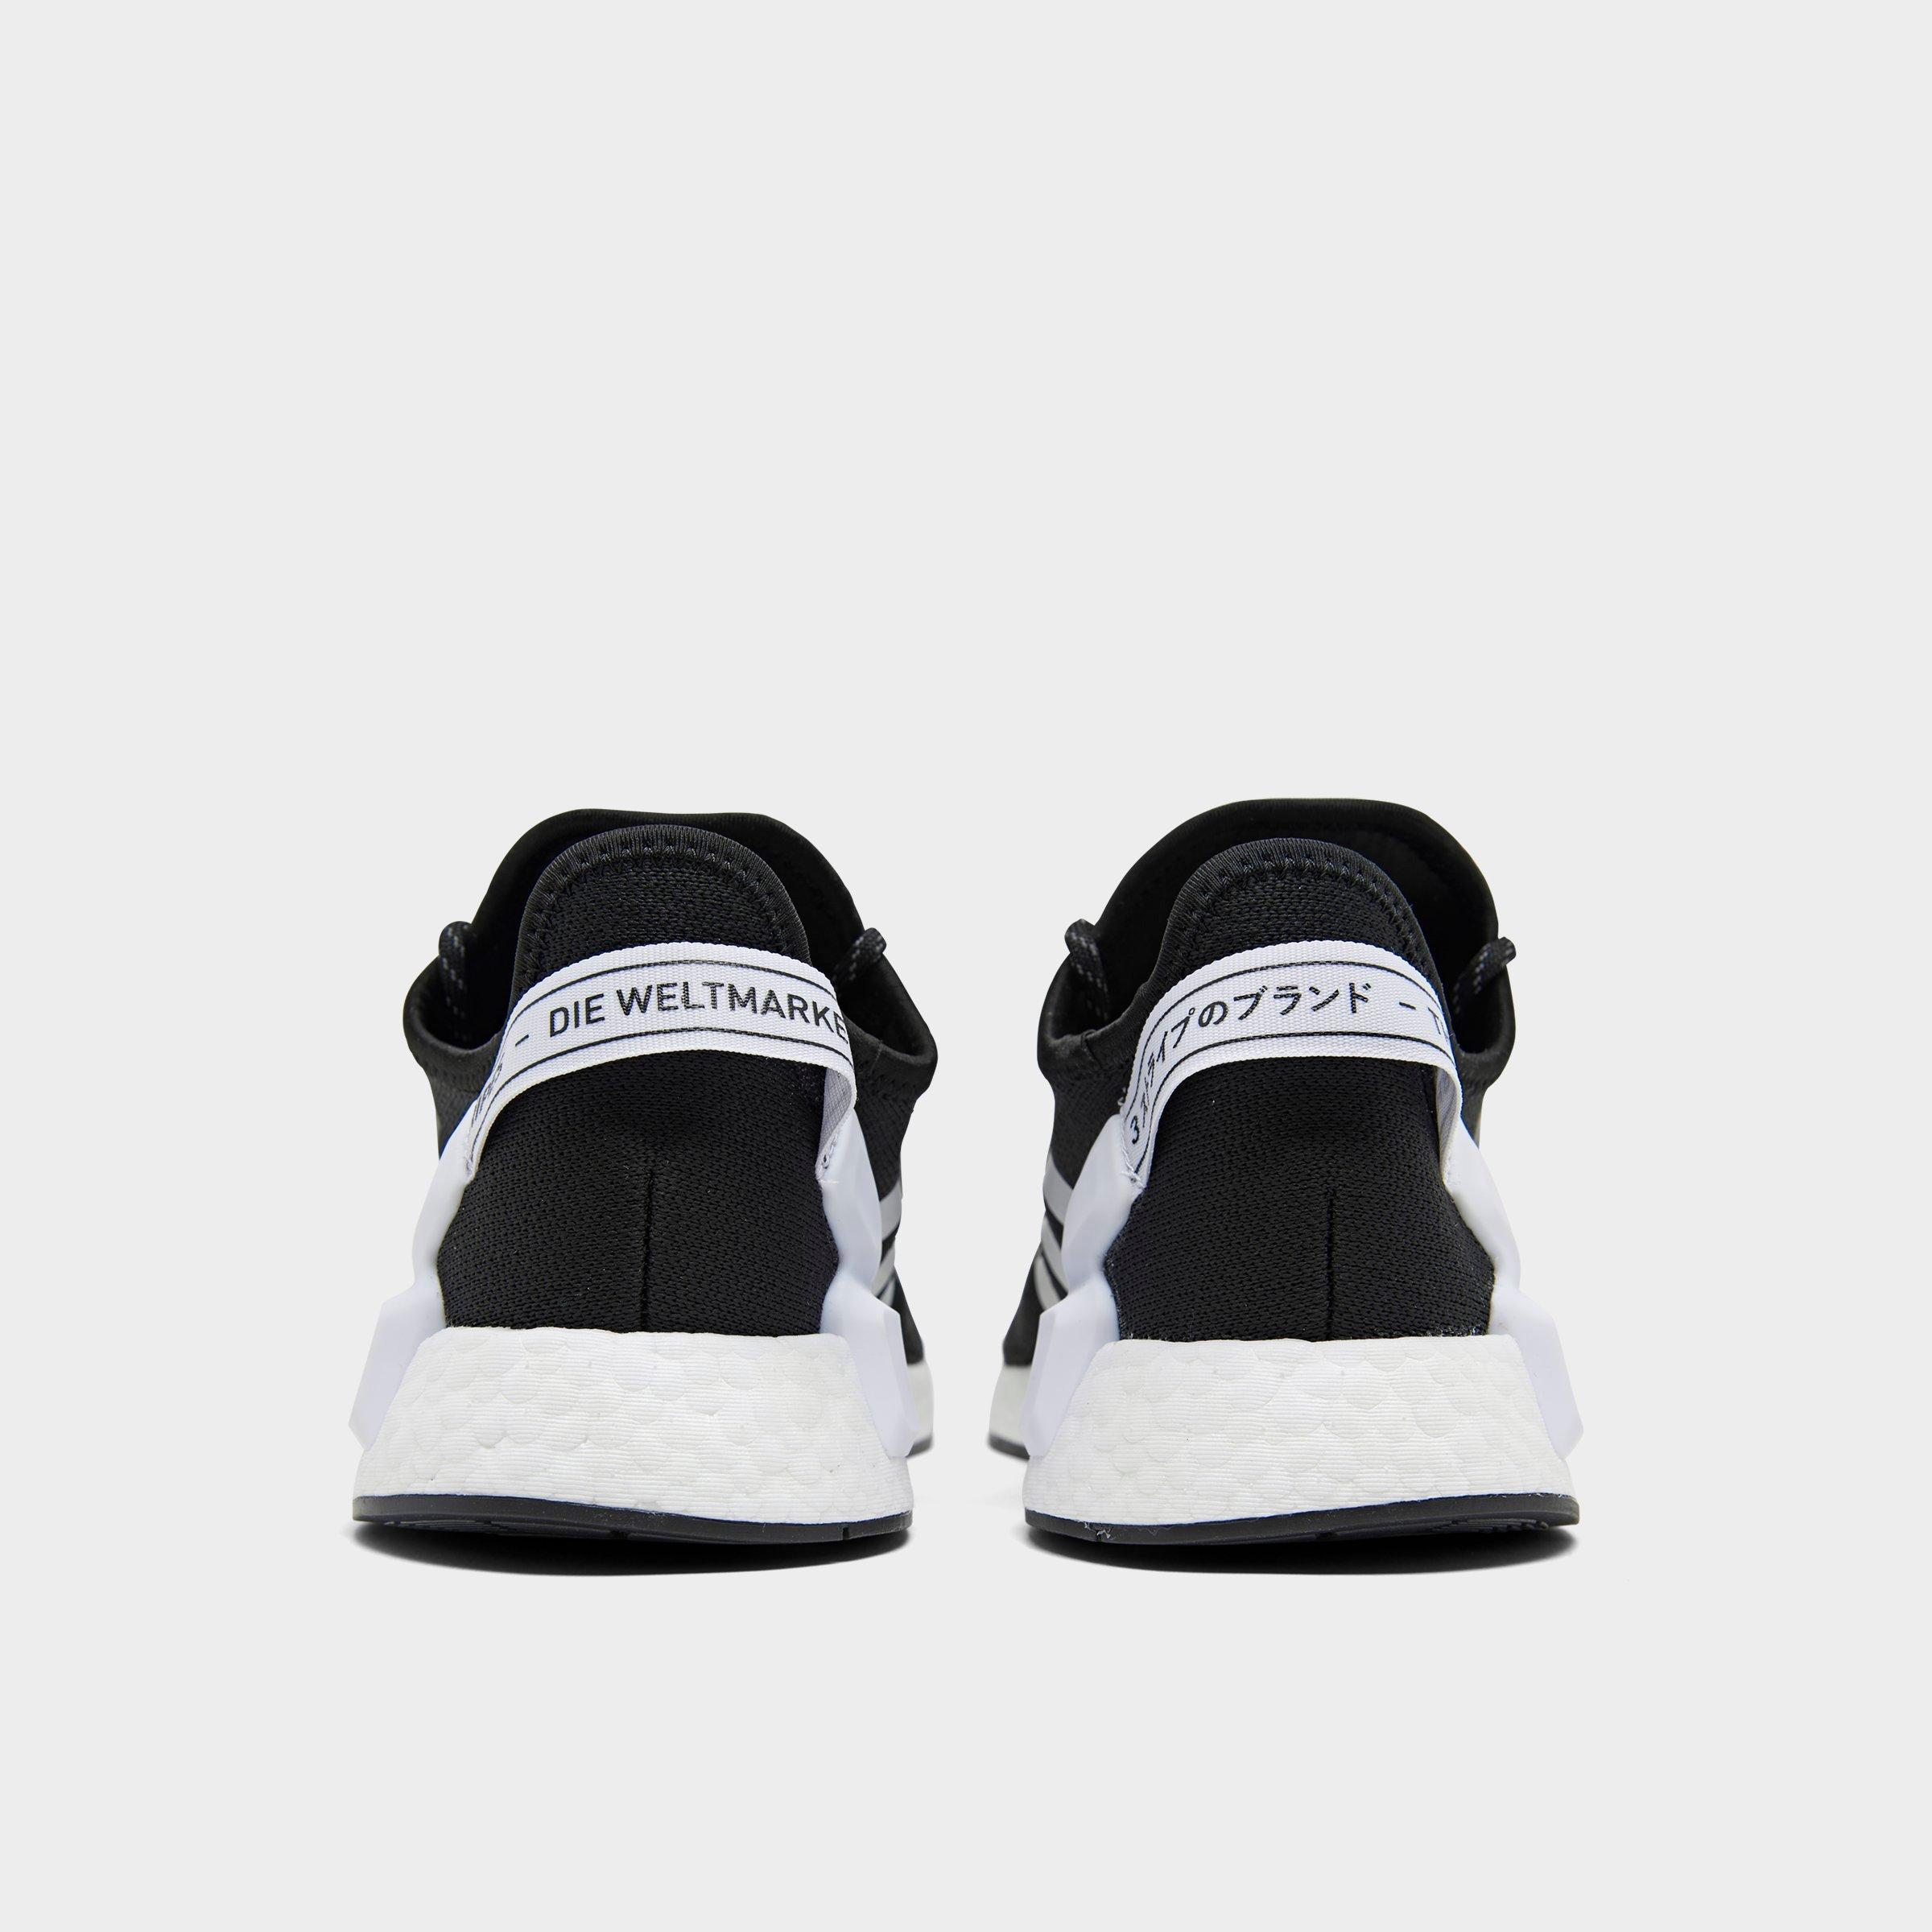 adidas NMD XR1 AND Primeknit Chaussures Femme et